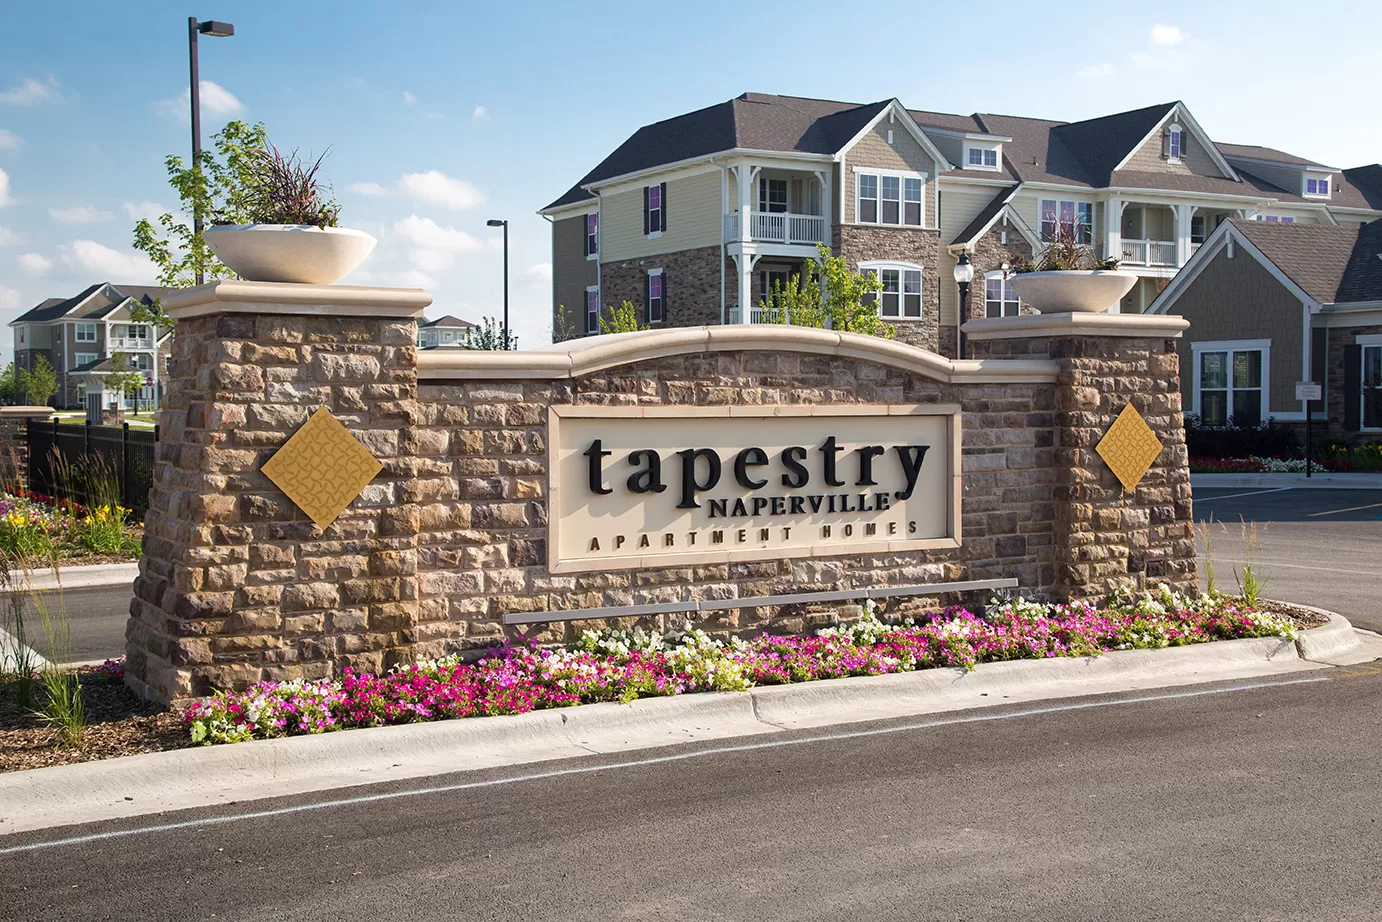 Tapestry Naperville